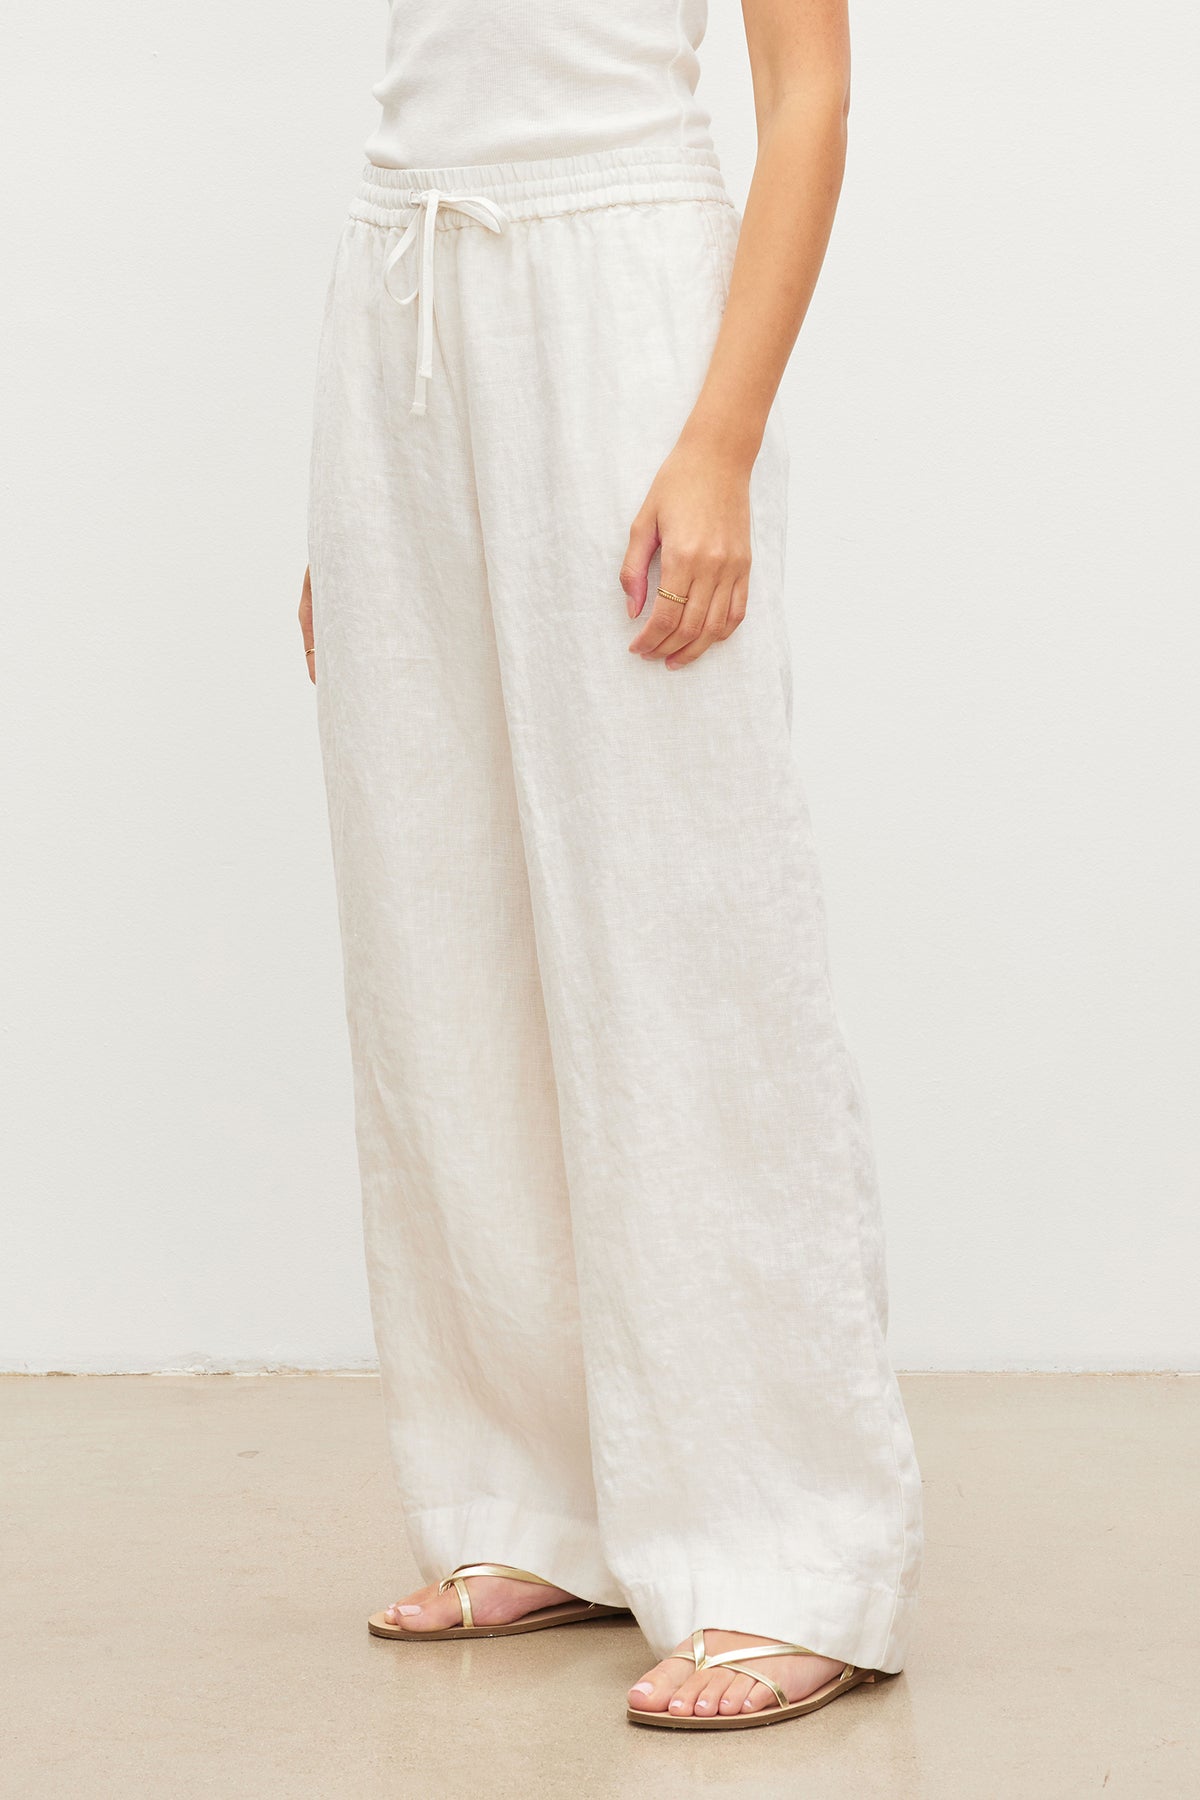   A woman wearing Gwyneth heavy linen pants by Velvet by Graham & Spencer with a relaxed drape and a white t-shirt. 